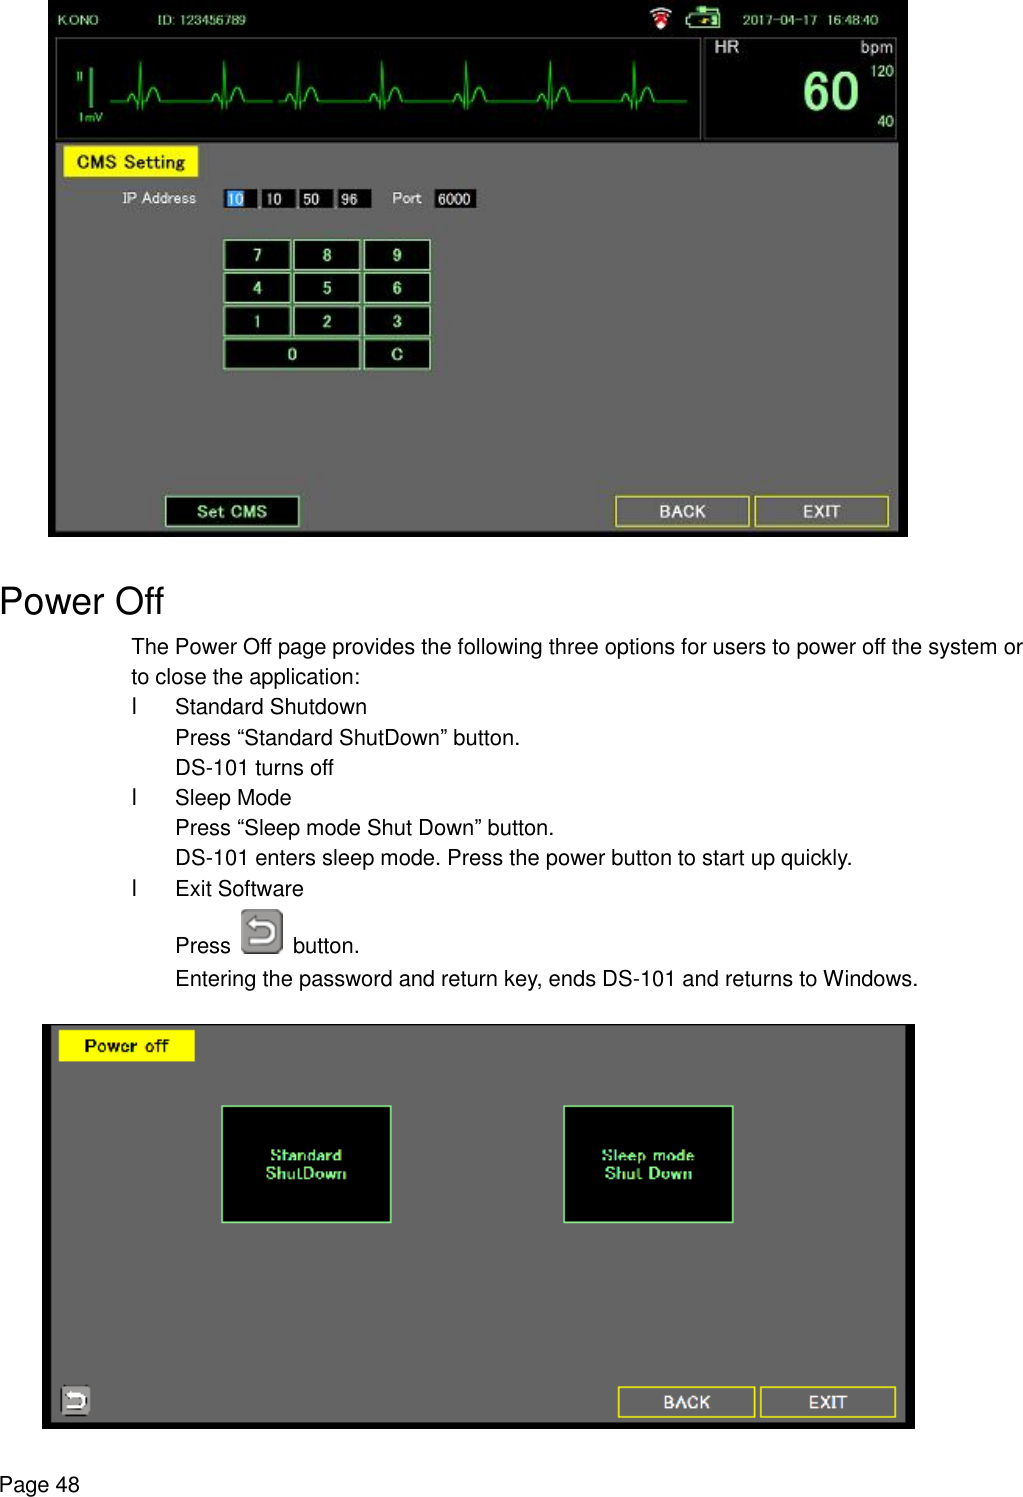    Page 48   Power Off The Power Off page provides the following three options for users to power off the system or to close the application: l Standard Shutdown Press “Standard ShutDown” button. DS-101 turns off l Sleep Mode Press “Sleep mode Shut Down” button. DS-101 enters sleep mode. Press the power button to start up quickly. l Exit Software Press   button. Entering the password and return key, ends DS-101 and returns to Windows.   